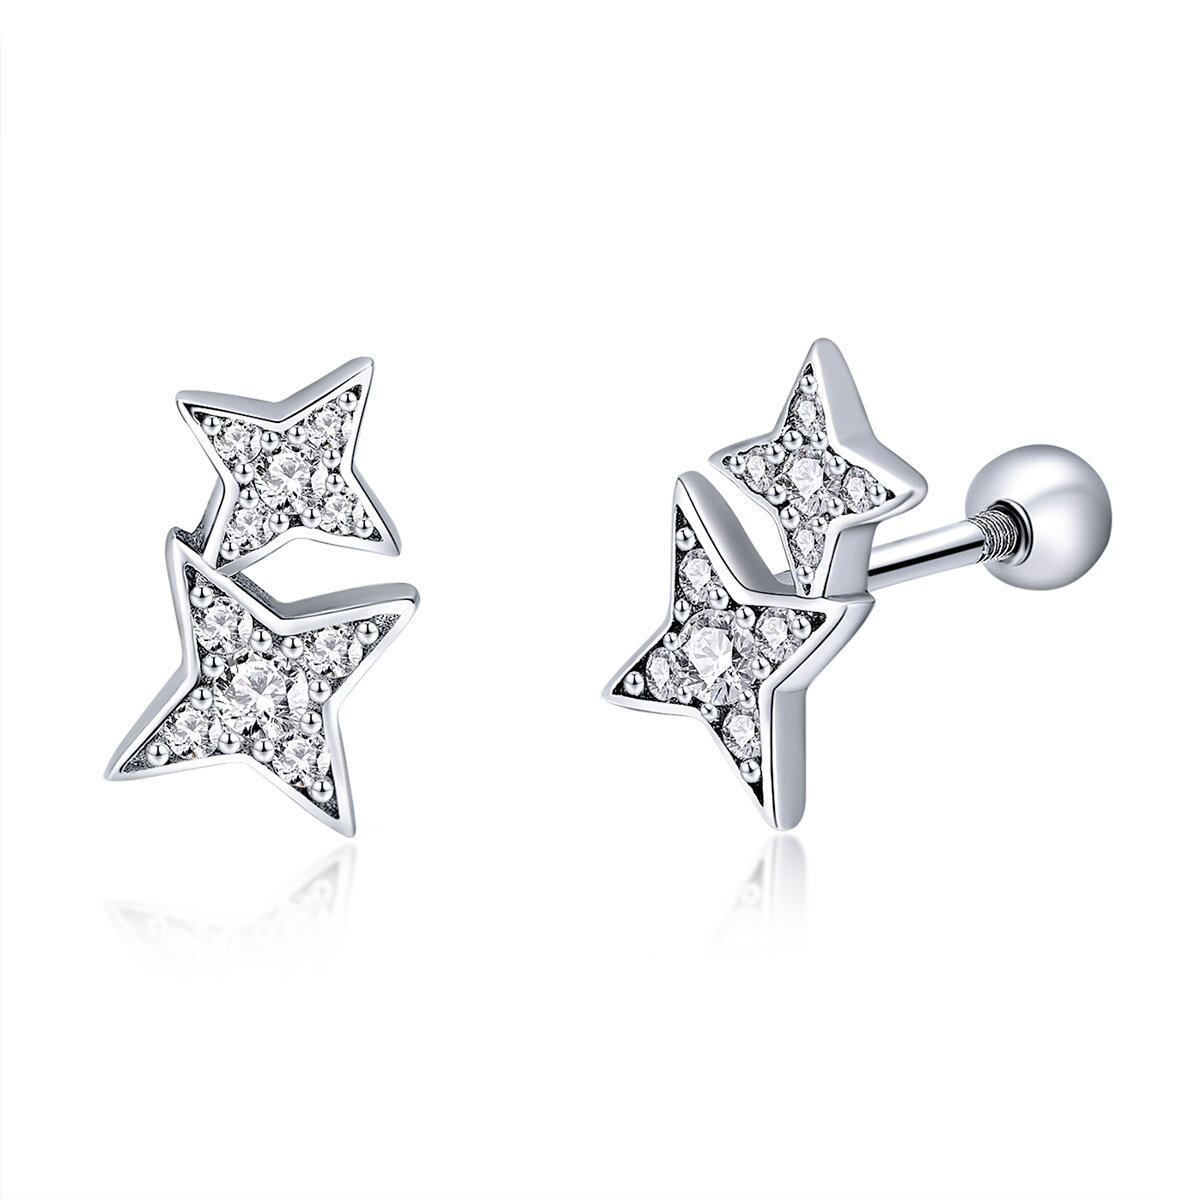 GemKing SCE432 Fascinating starlight S925 Sterling Silver Earring